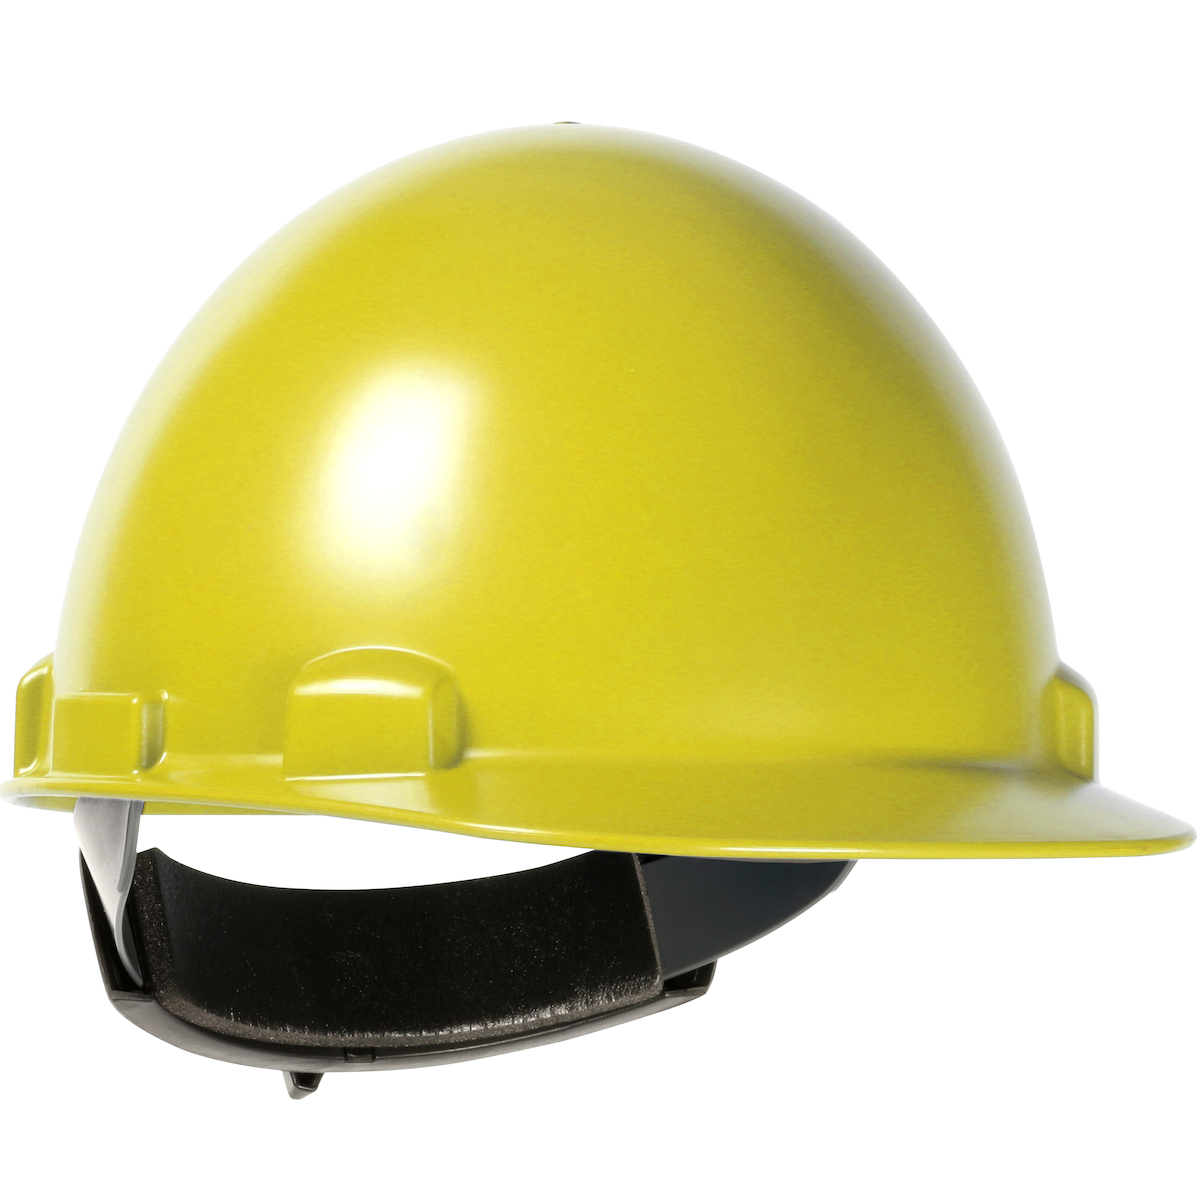 TYPE II, CAP STYLE SMOOTH DOME HARD HAT WITH ABS/POLYCARBONATE SHELL, 4-POINT TEXTILE SUSPENSION AND WHEEL RATCHET ADJUSTMENT